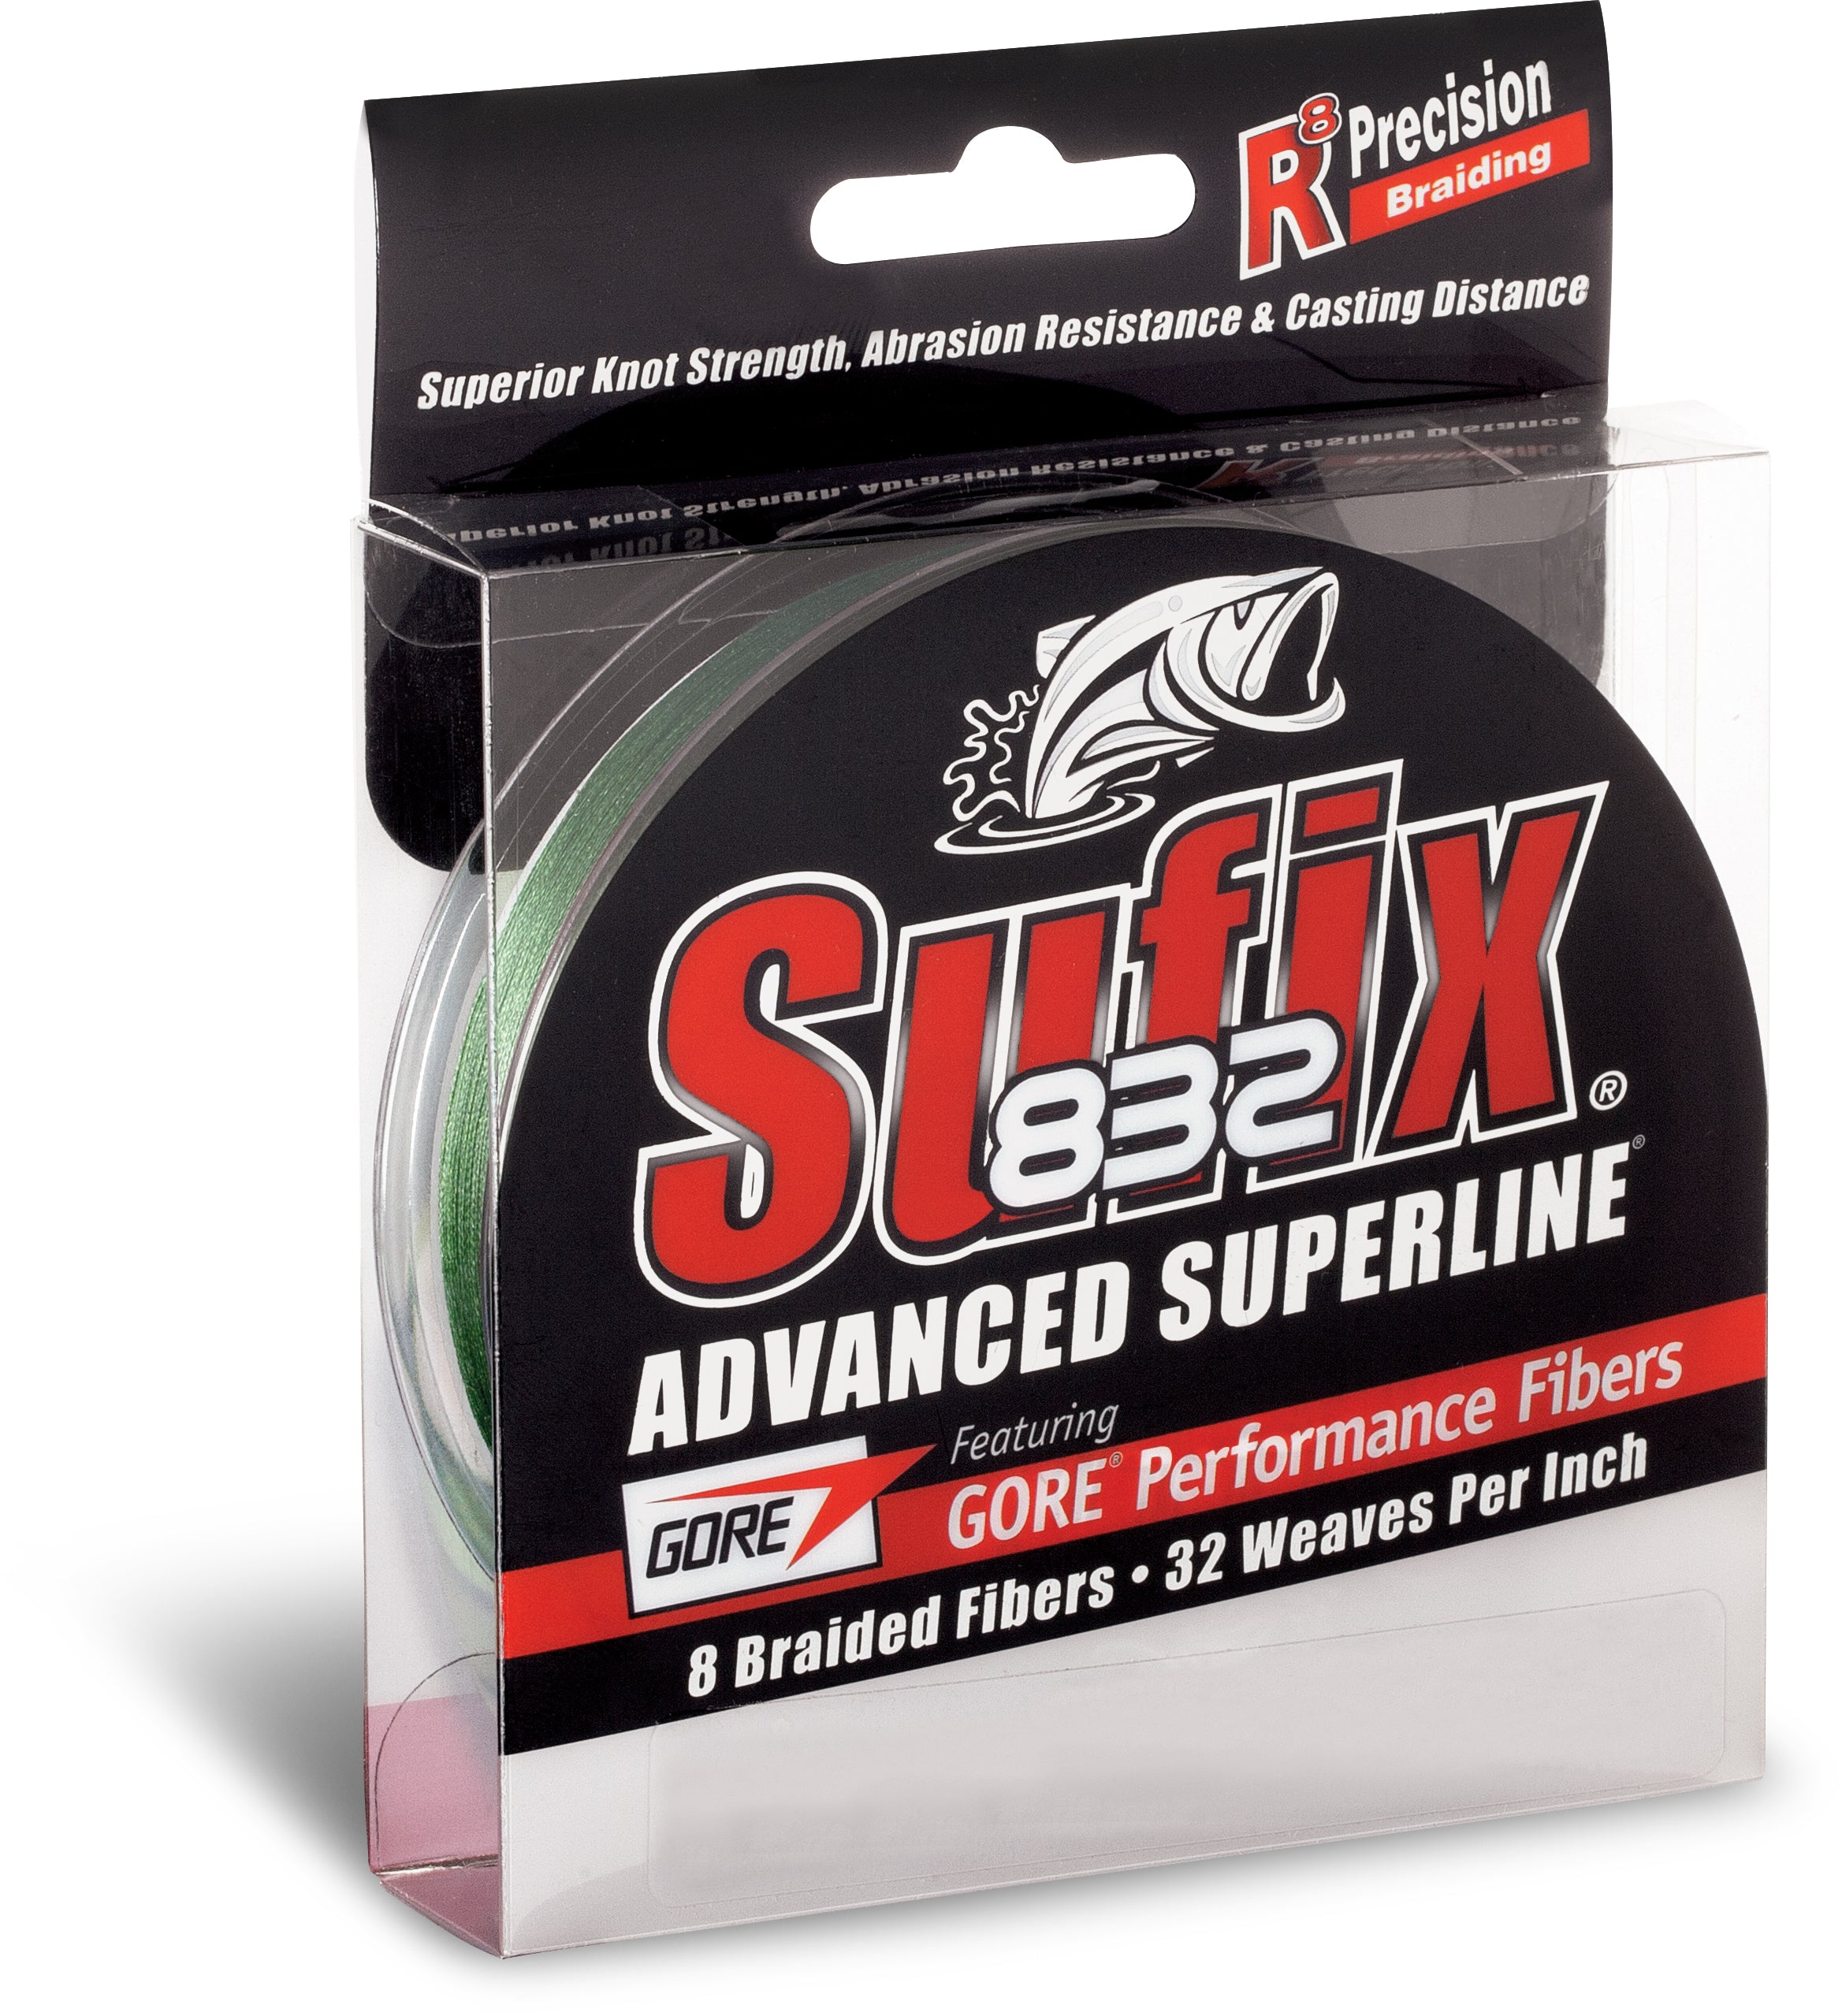 Best Braided Fishing Lines - Power Pro, Sufix & More